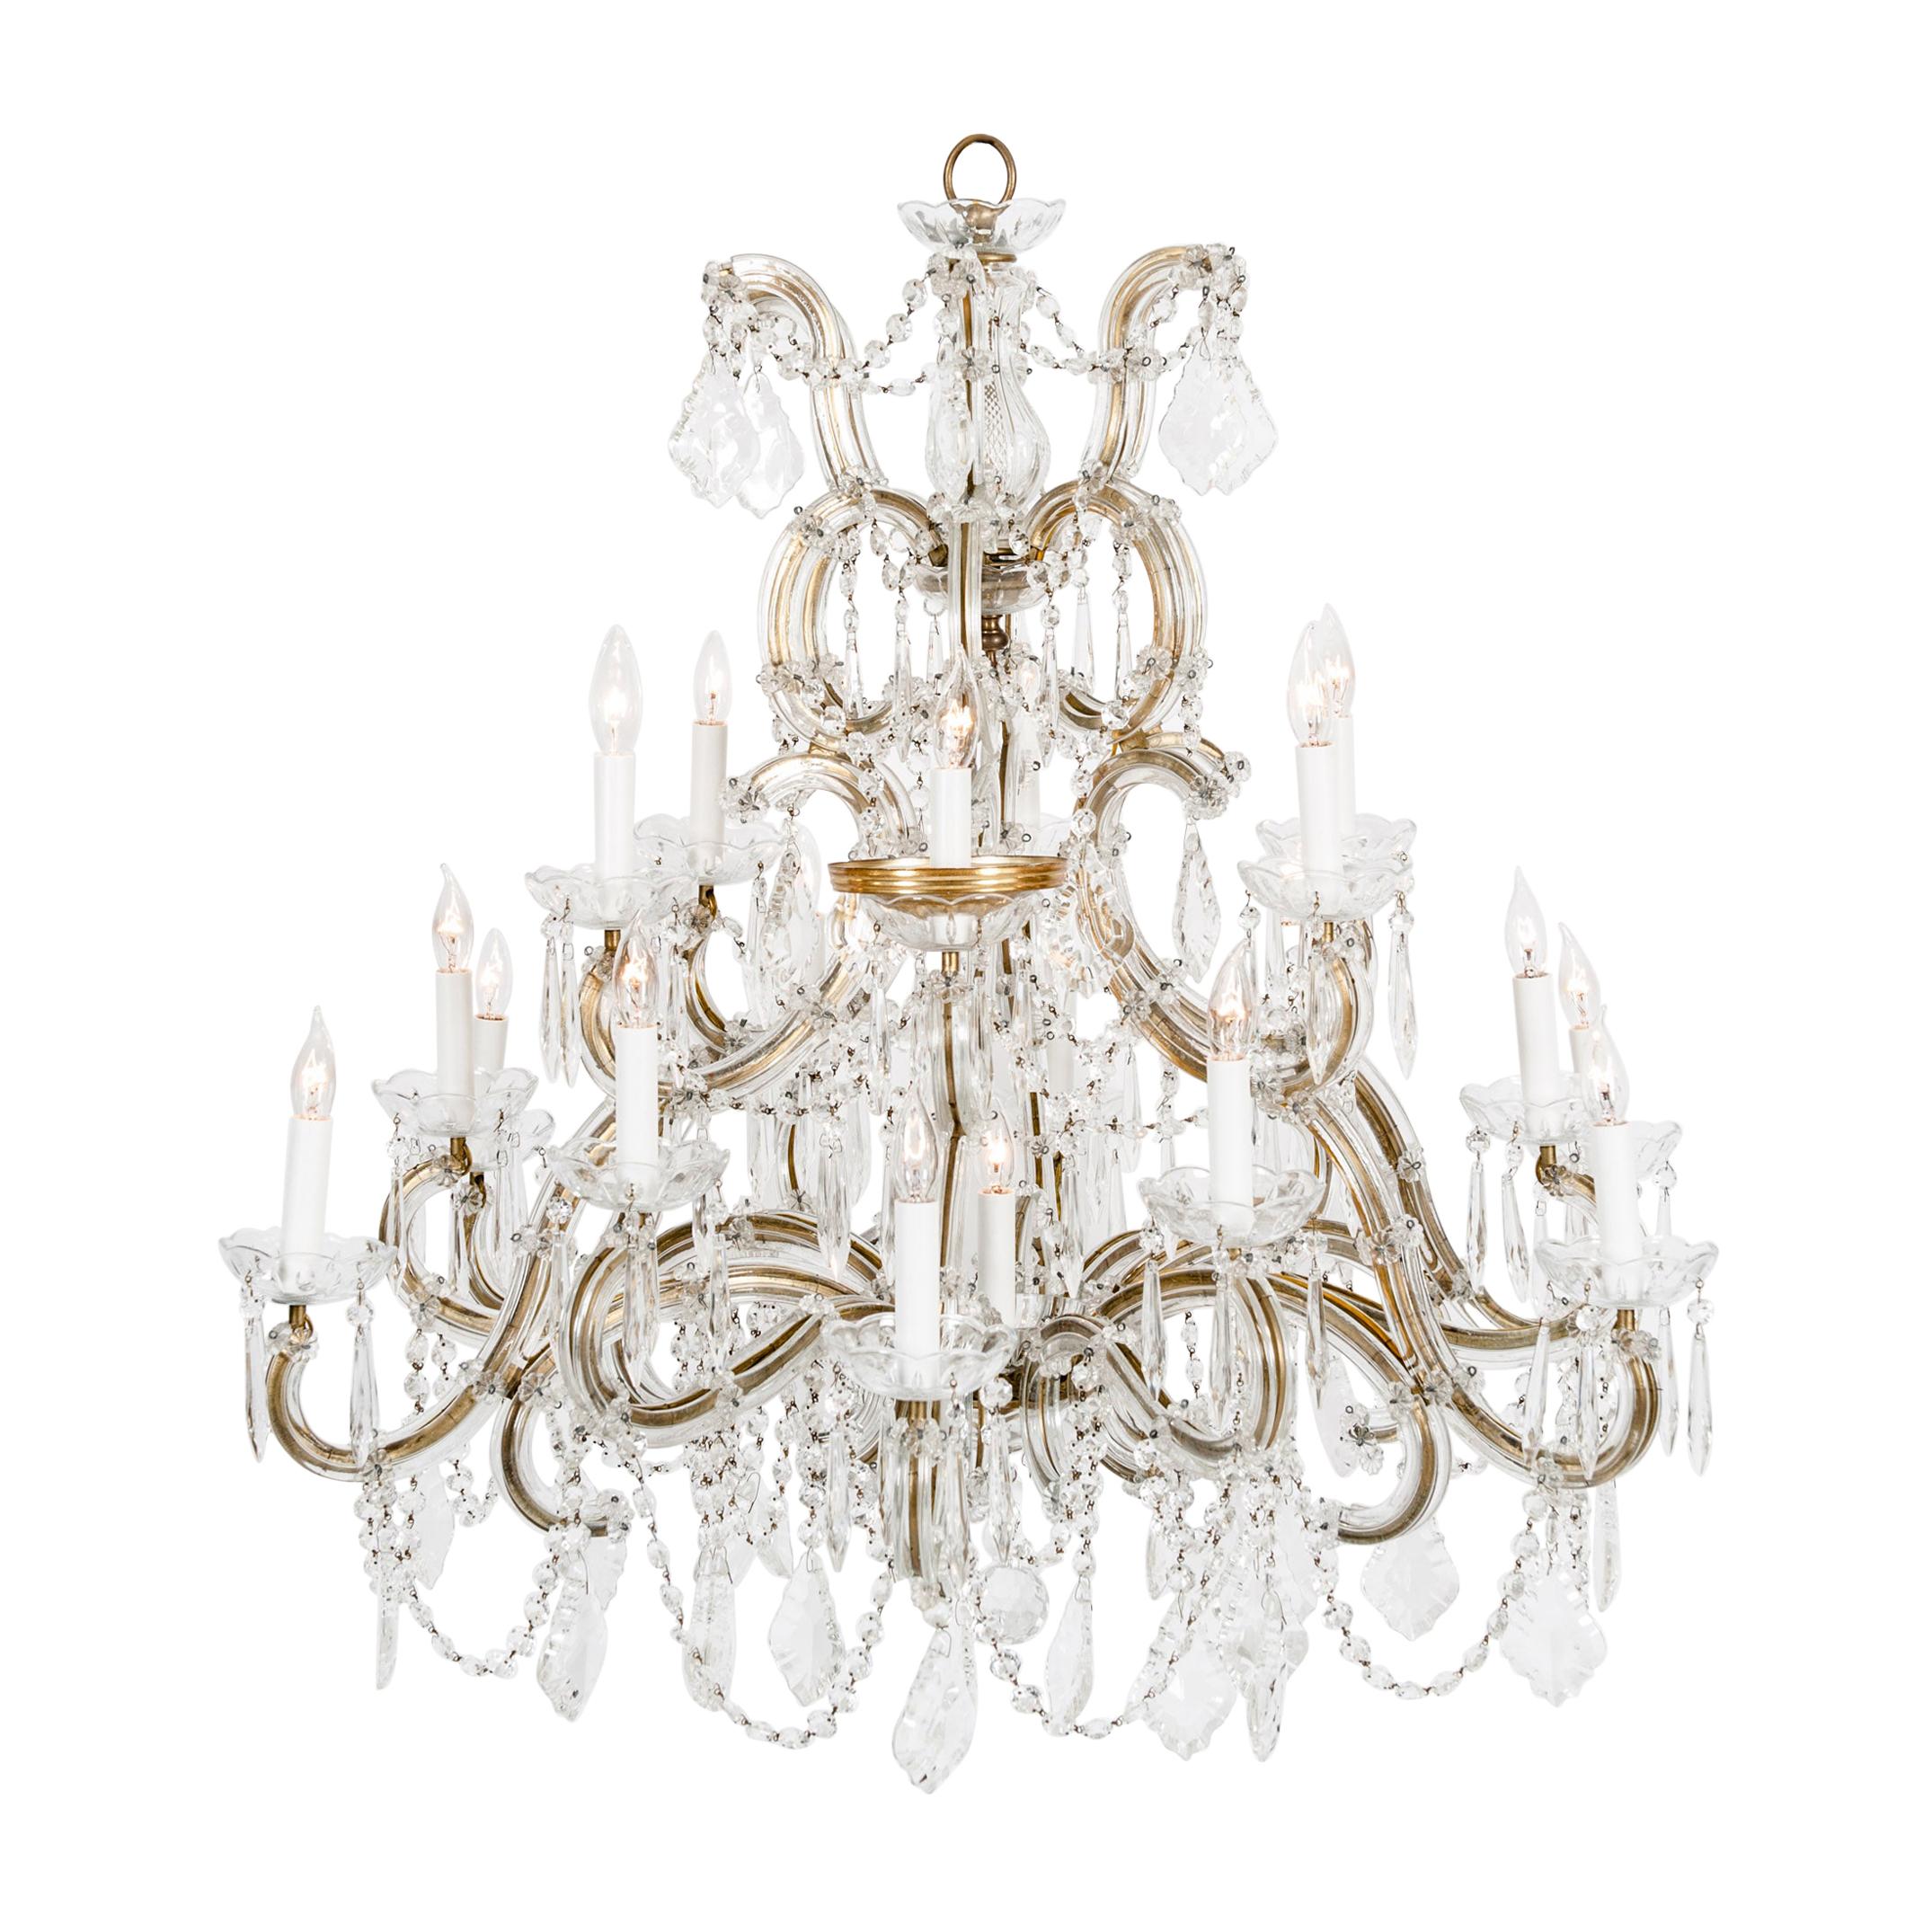 Late 19th Century Cut Crystal 18-Light Hanging Chandelier